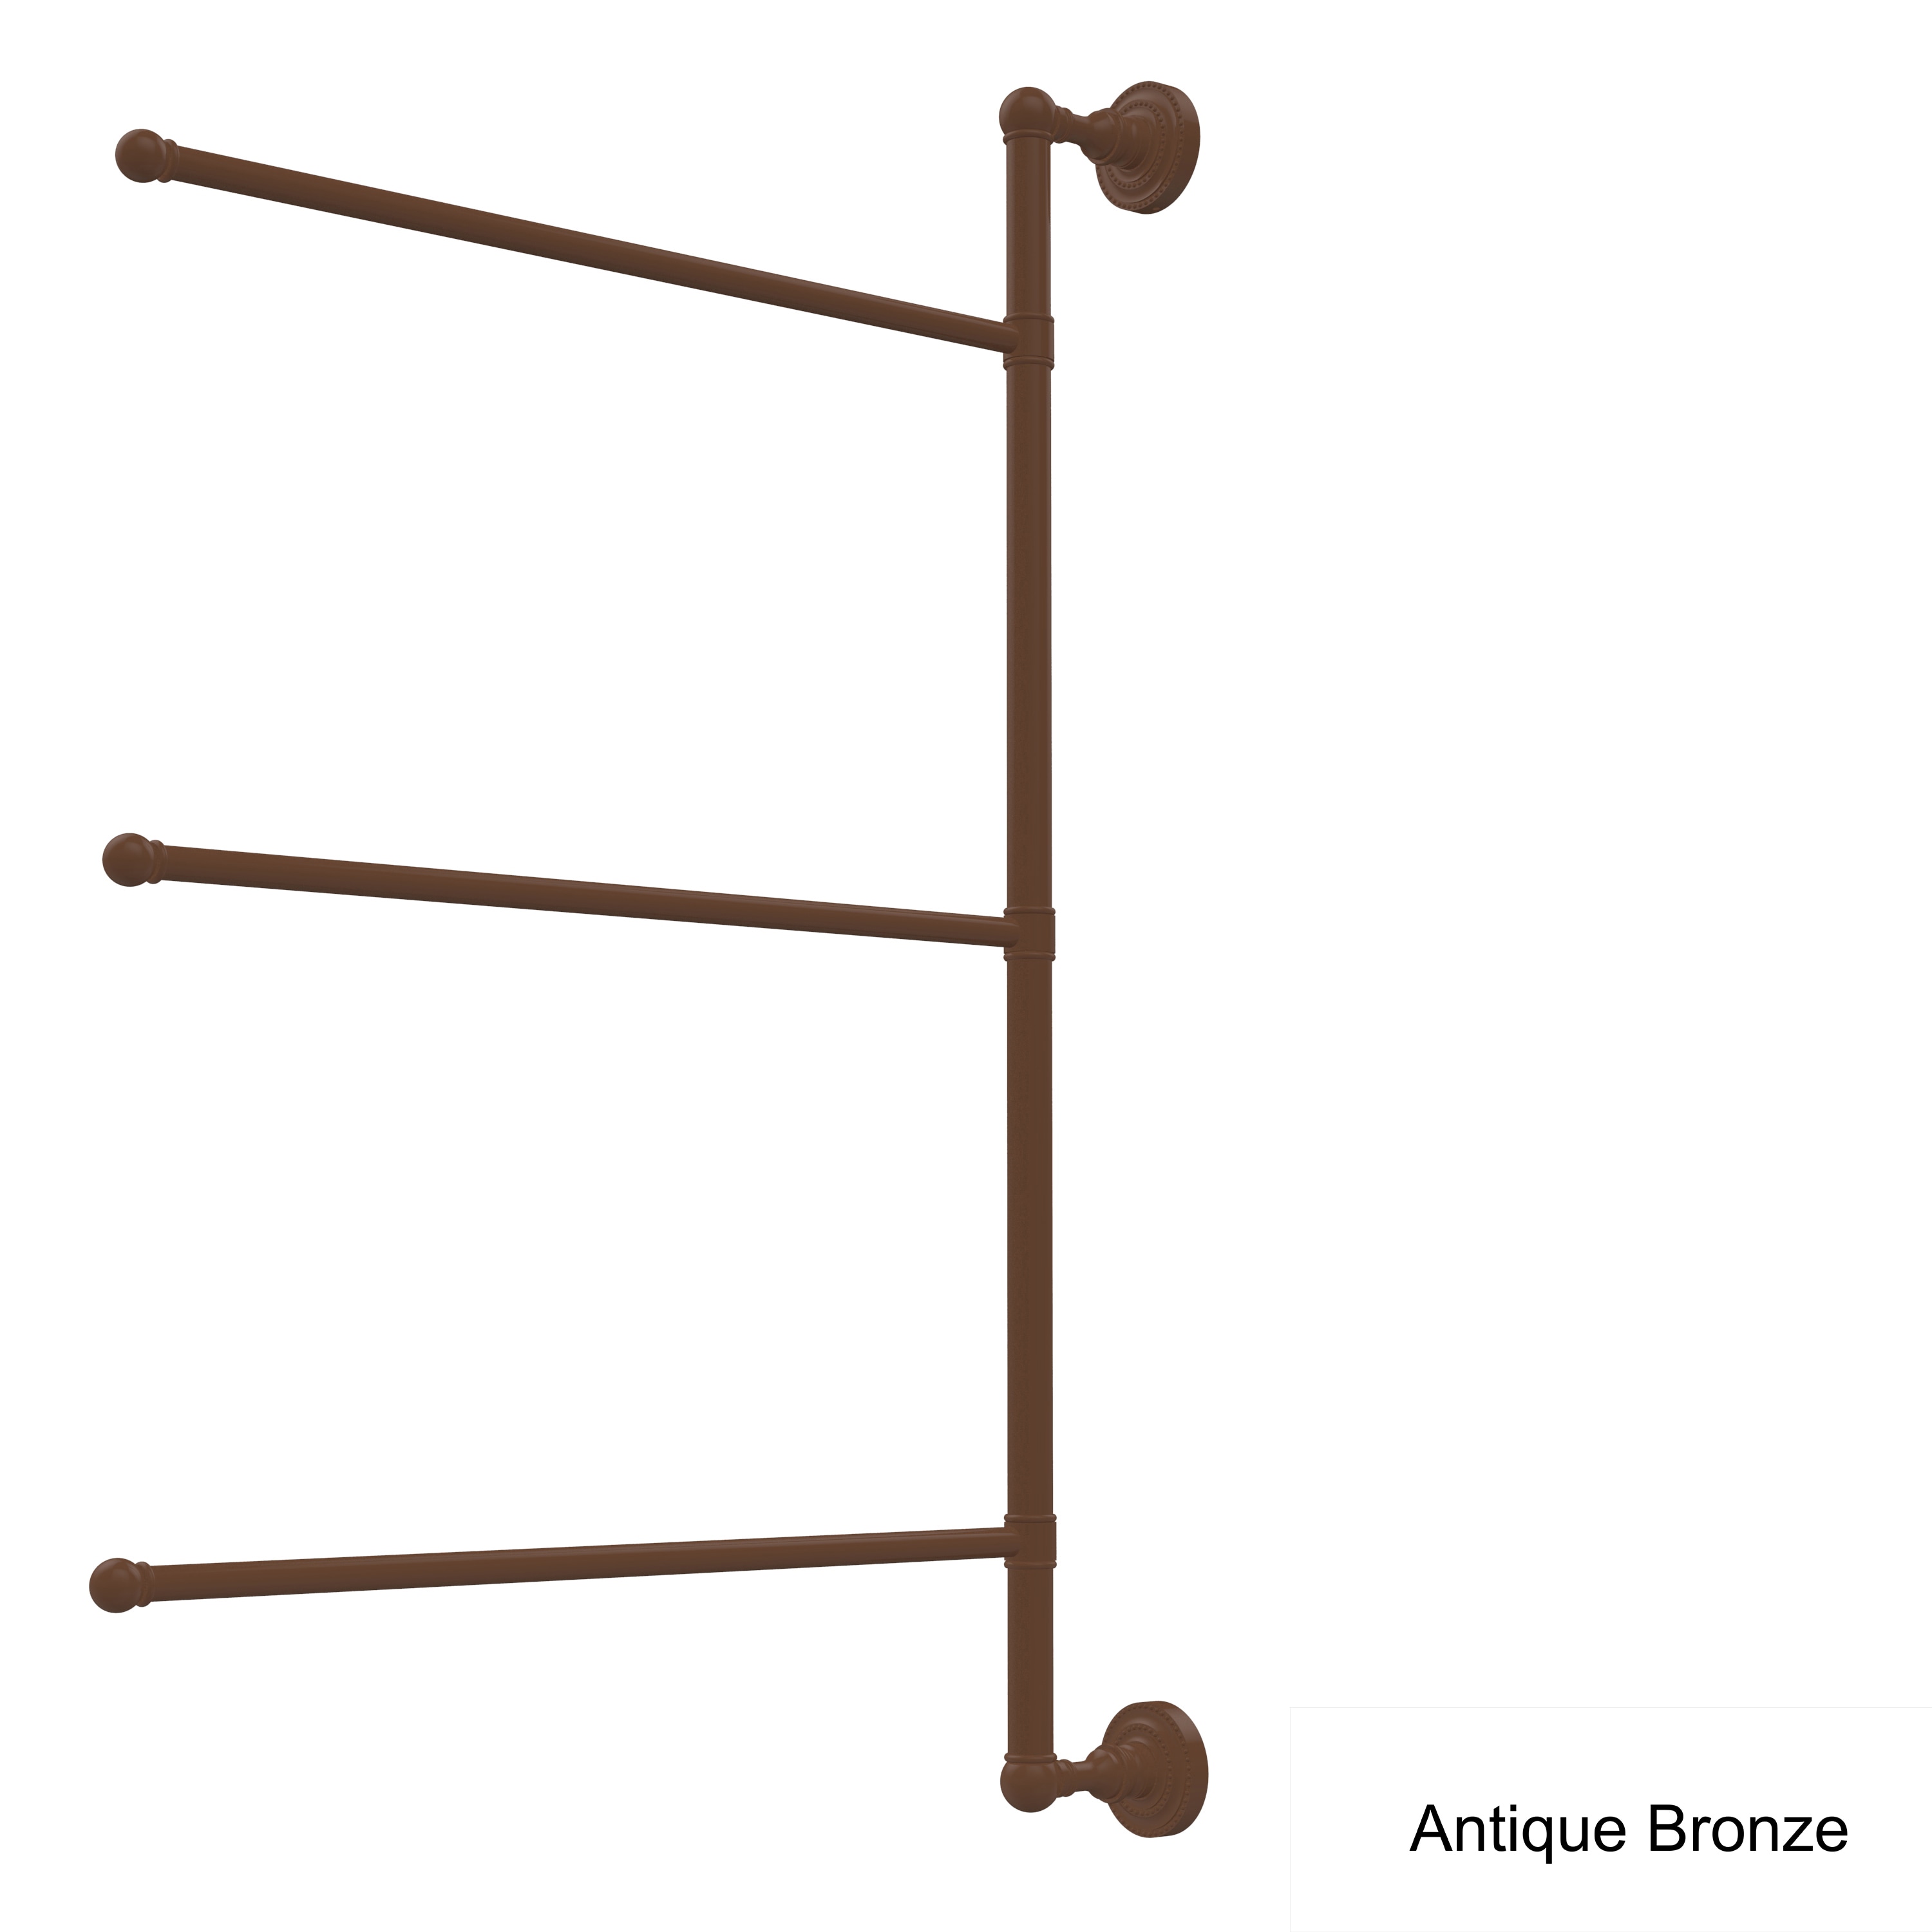 Allied Brass Dottingham Collection 2-Swing Arm Towel Rail in Brushed Bronze